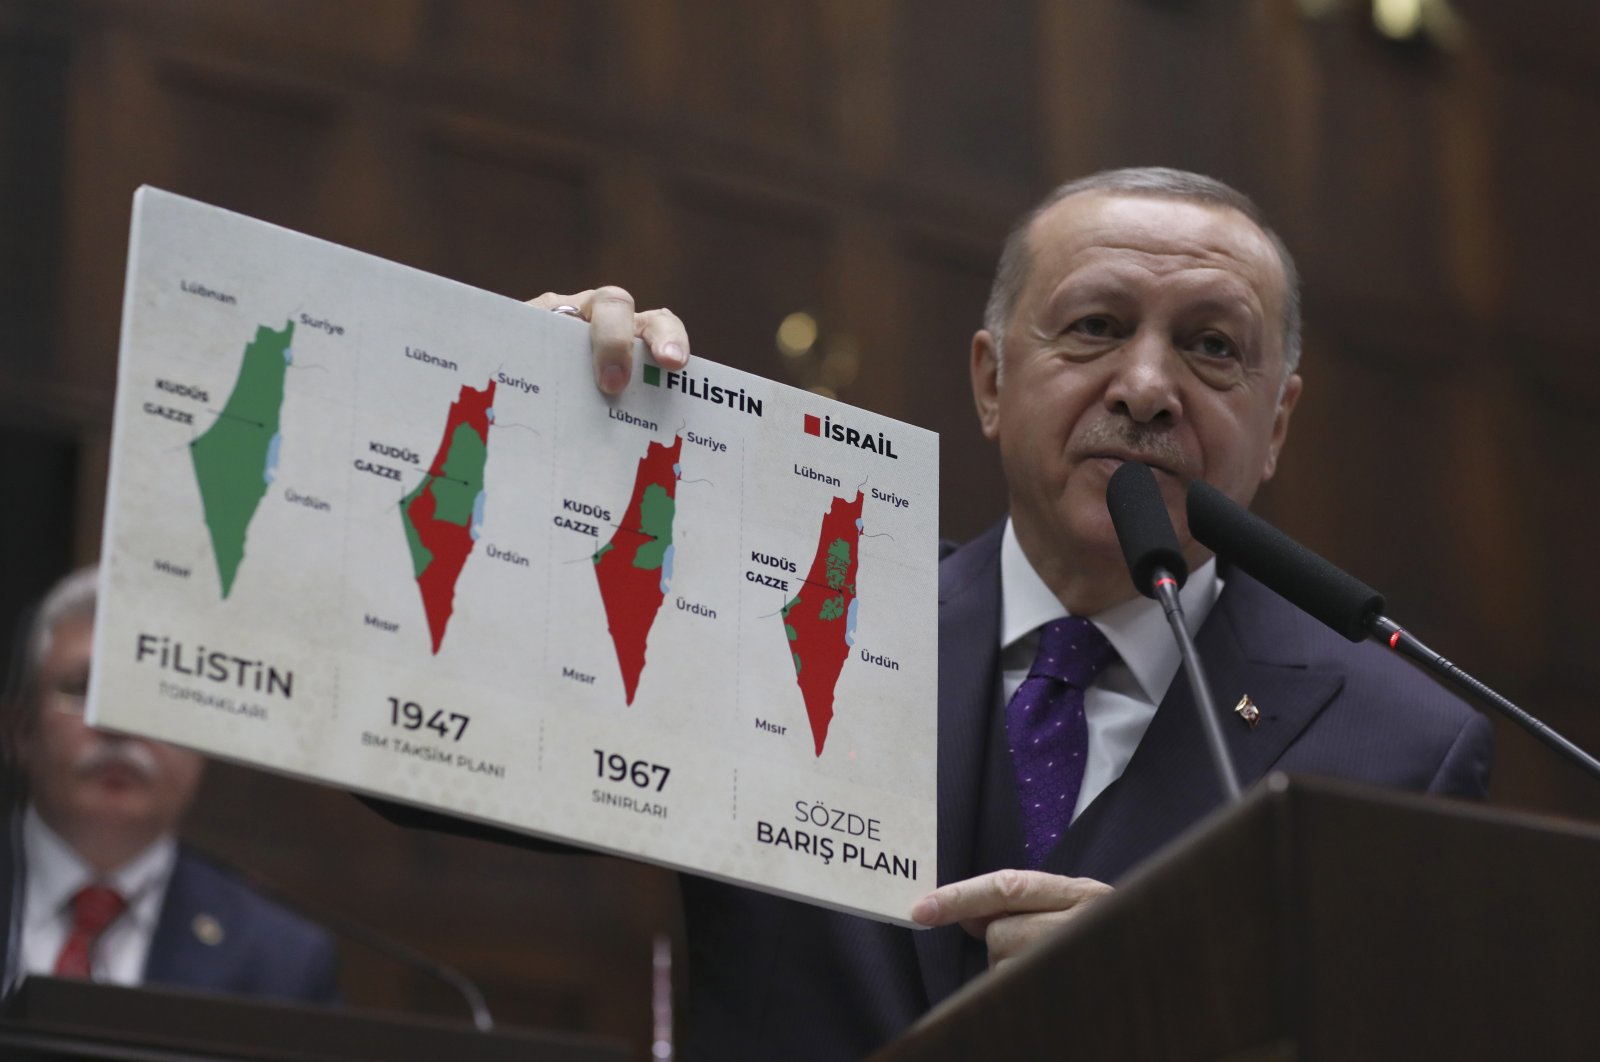 President Recep Tayyip Erdoğan holds up a placard with a series of maps of historical Palestine during a speech at the Parliament in Ankara, Türkiye, Feb. 5, 2020. (AP Photo)